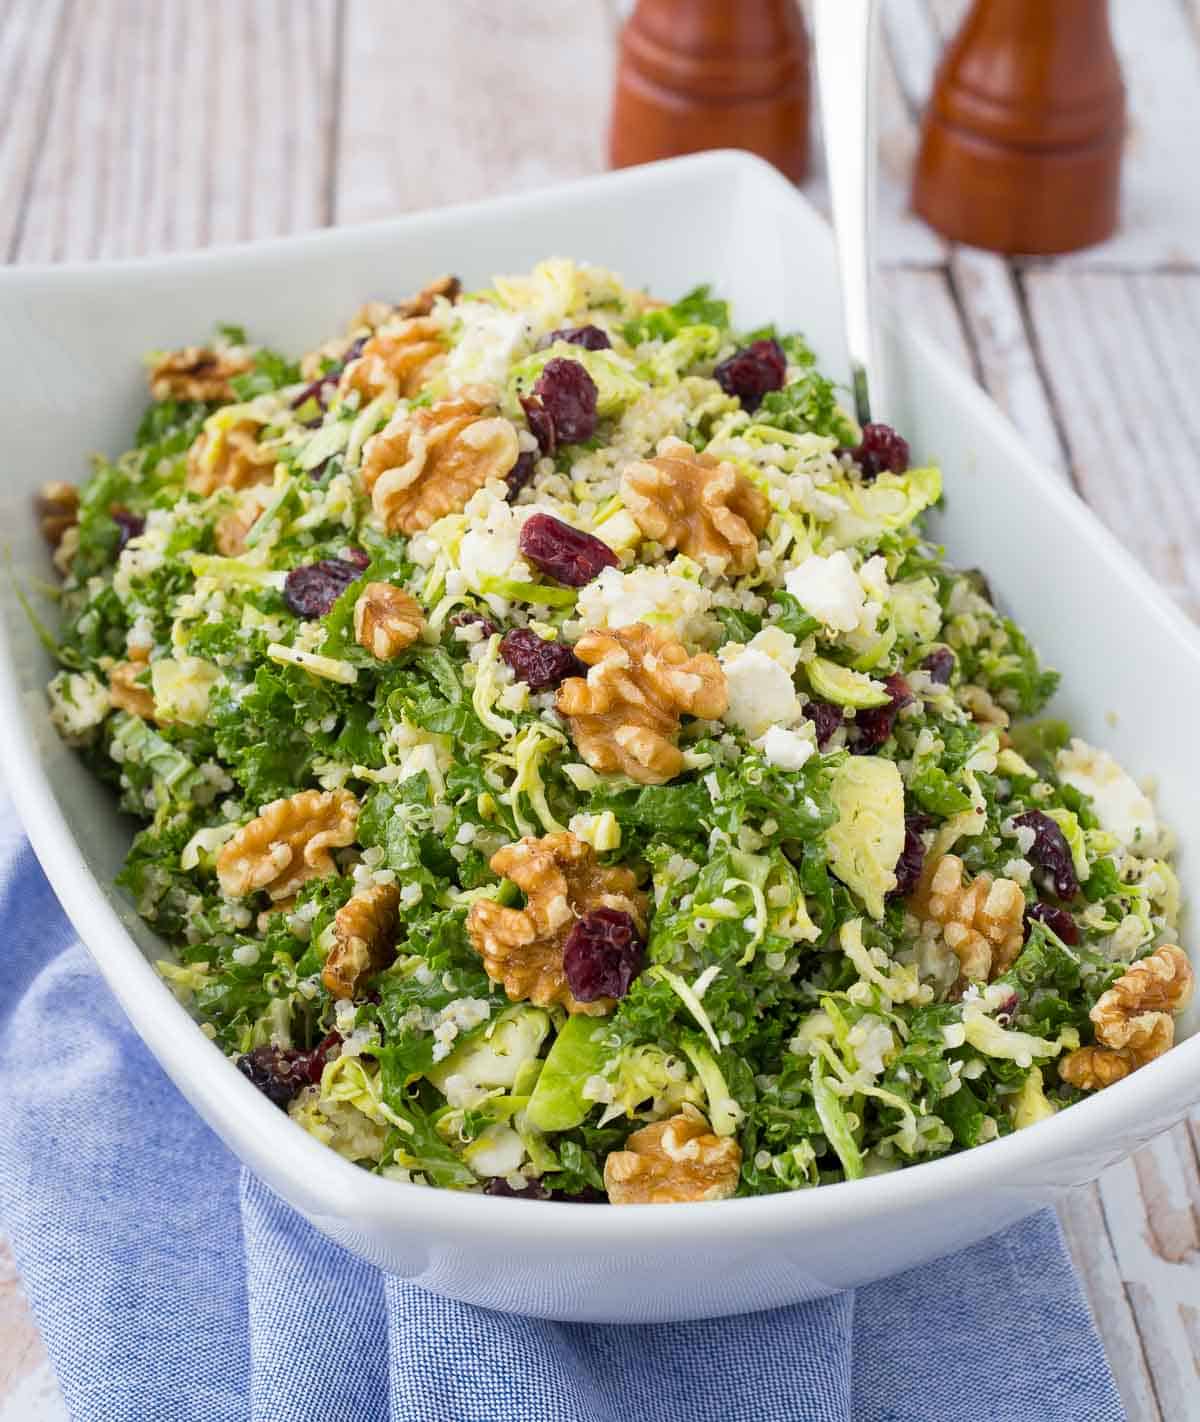 Kale and quinoa salad in a bowl.